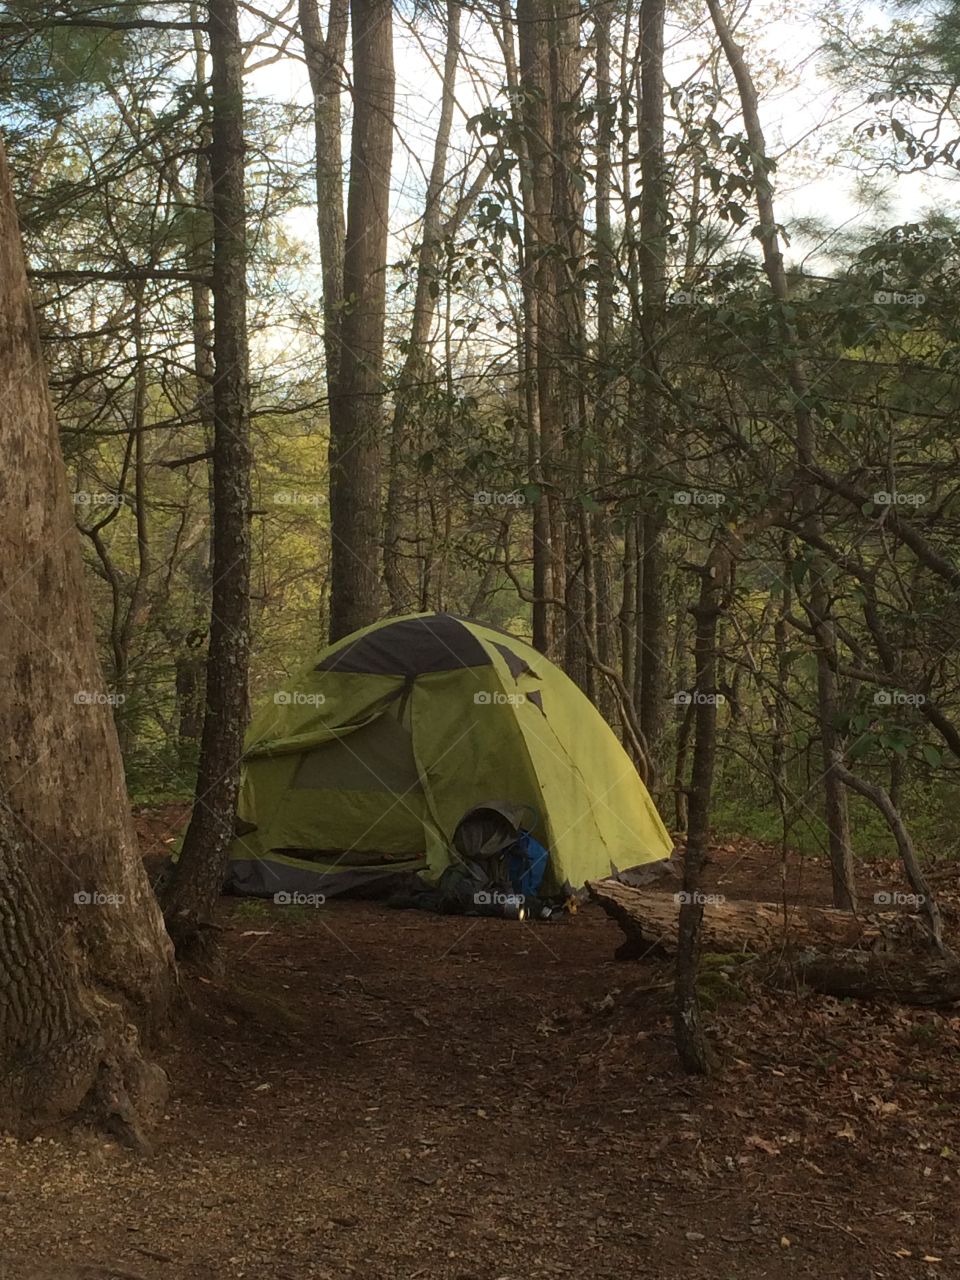 Tent site camping on the Appalachian Trail